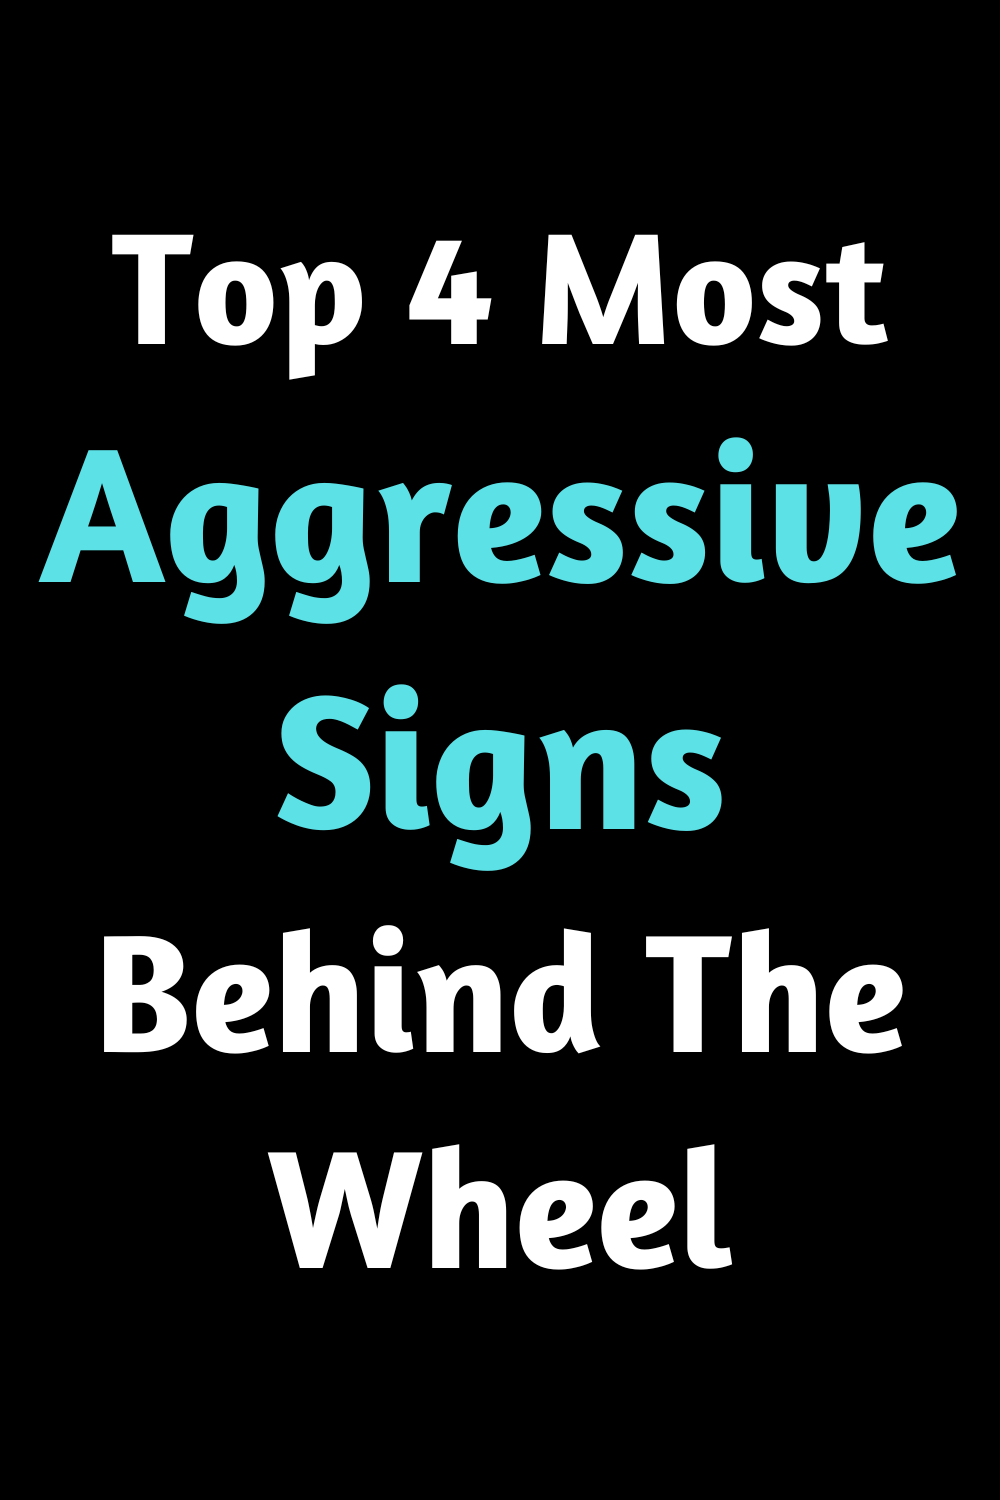 Top 4 Most Aggressive Signs Behind The Wheel